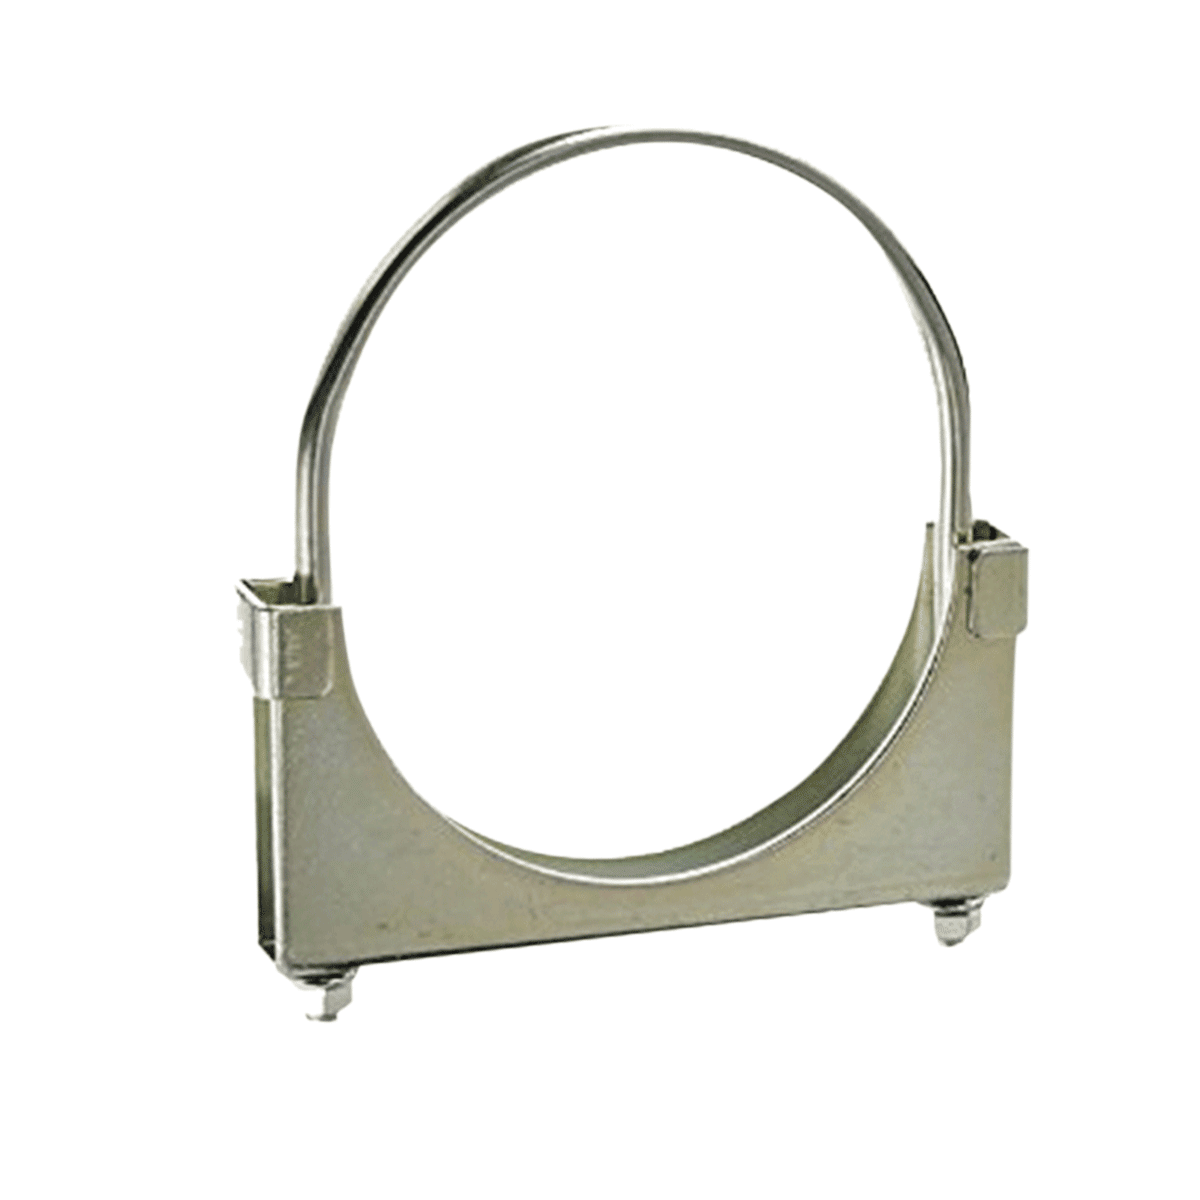 CLAMP 5" Double flat band clamp - Zinc